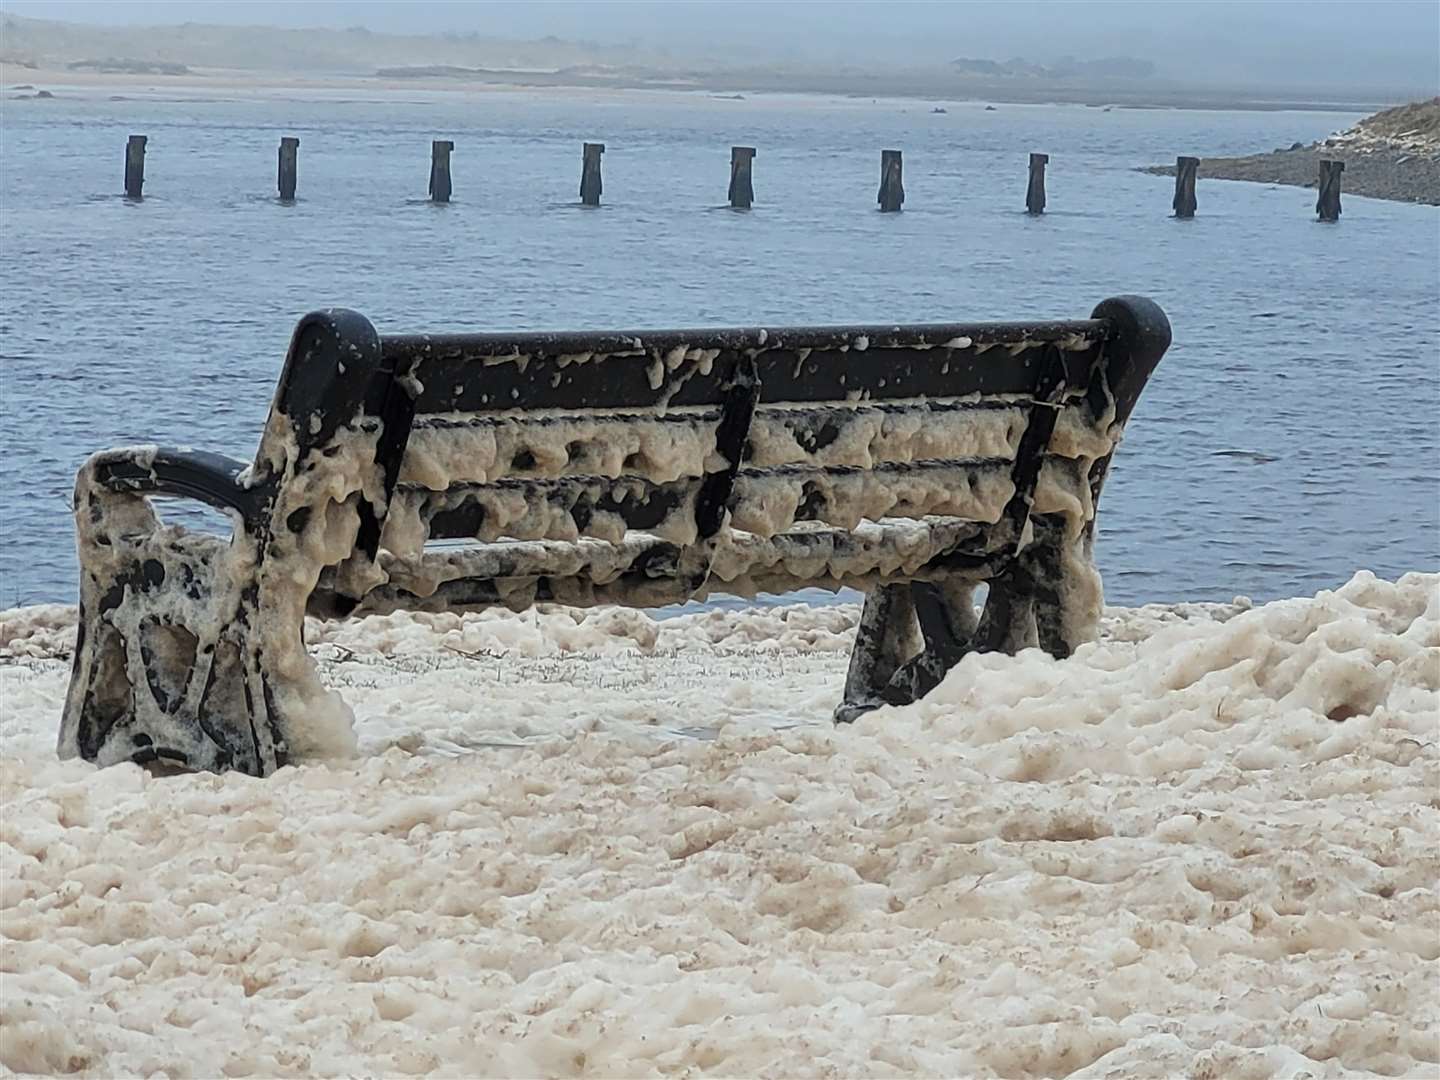 A wild and frothy Lossiemouth as captured by Northern Scot reader Hazel Thomson.